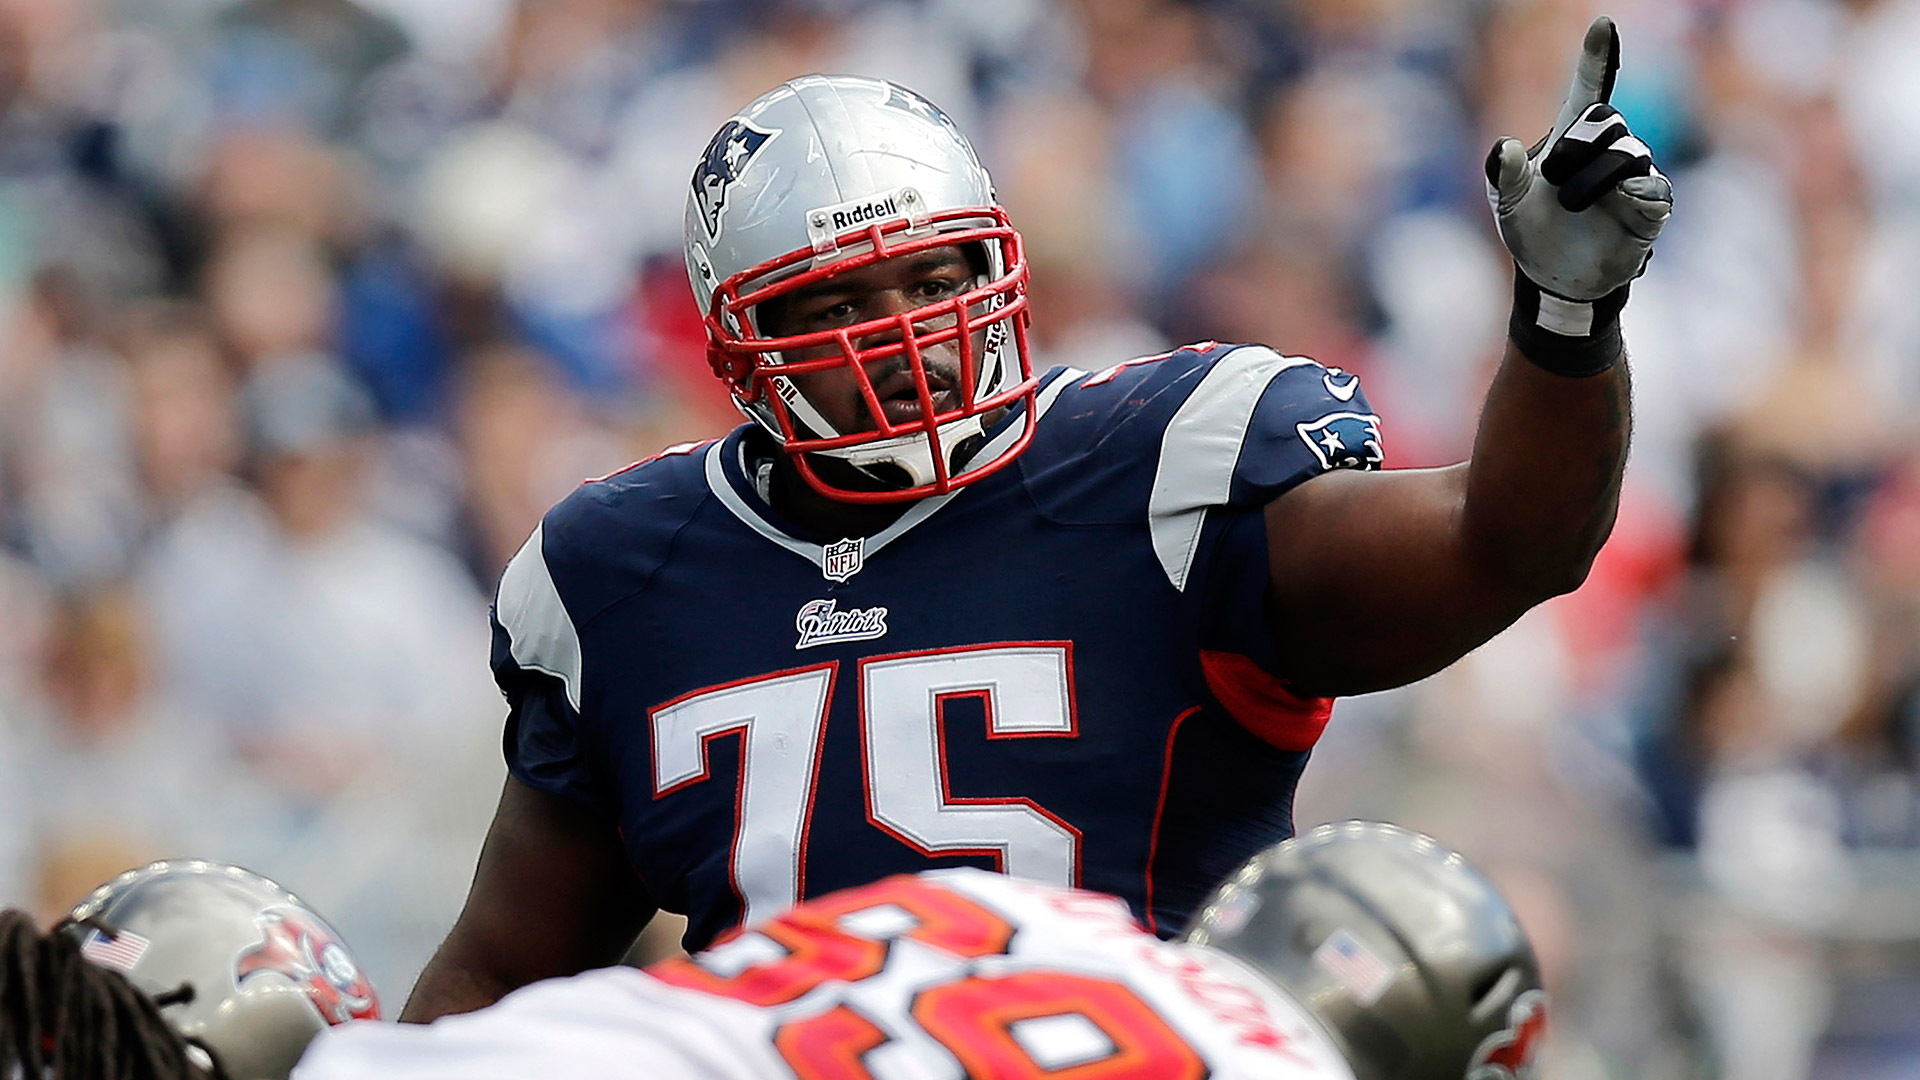 New England Patriots DT Vince Wilfork could miss out on $1.25 million if he  sits vs. Bills - Sports Illustrated